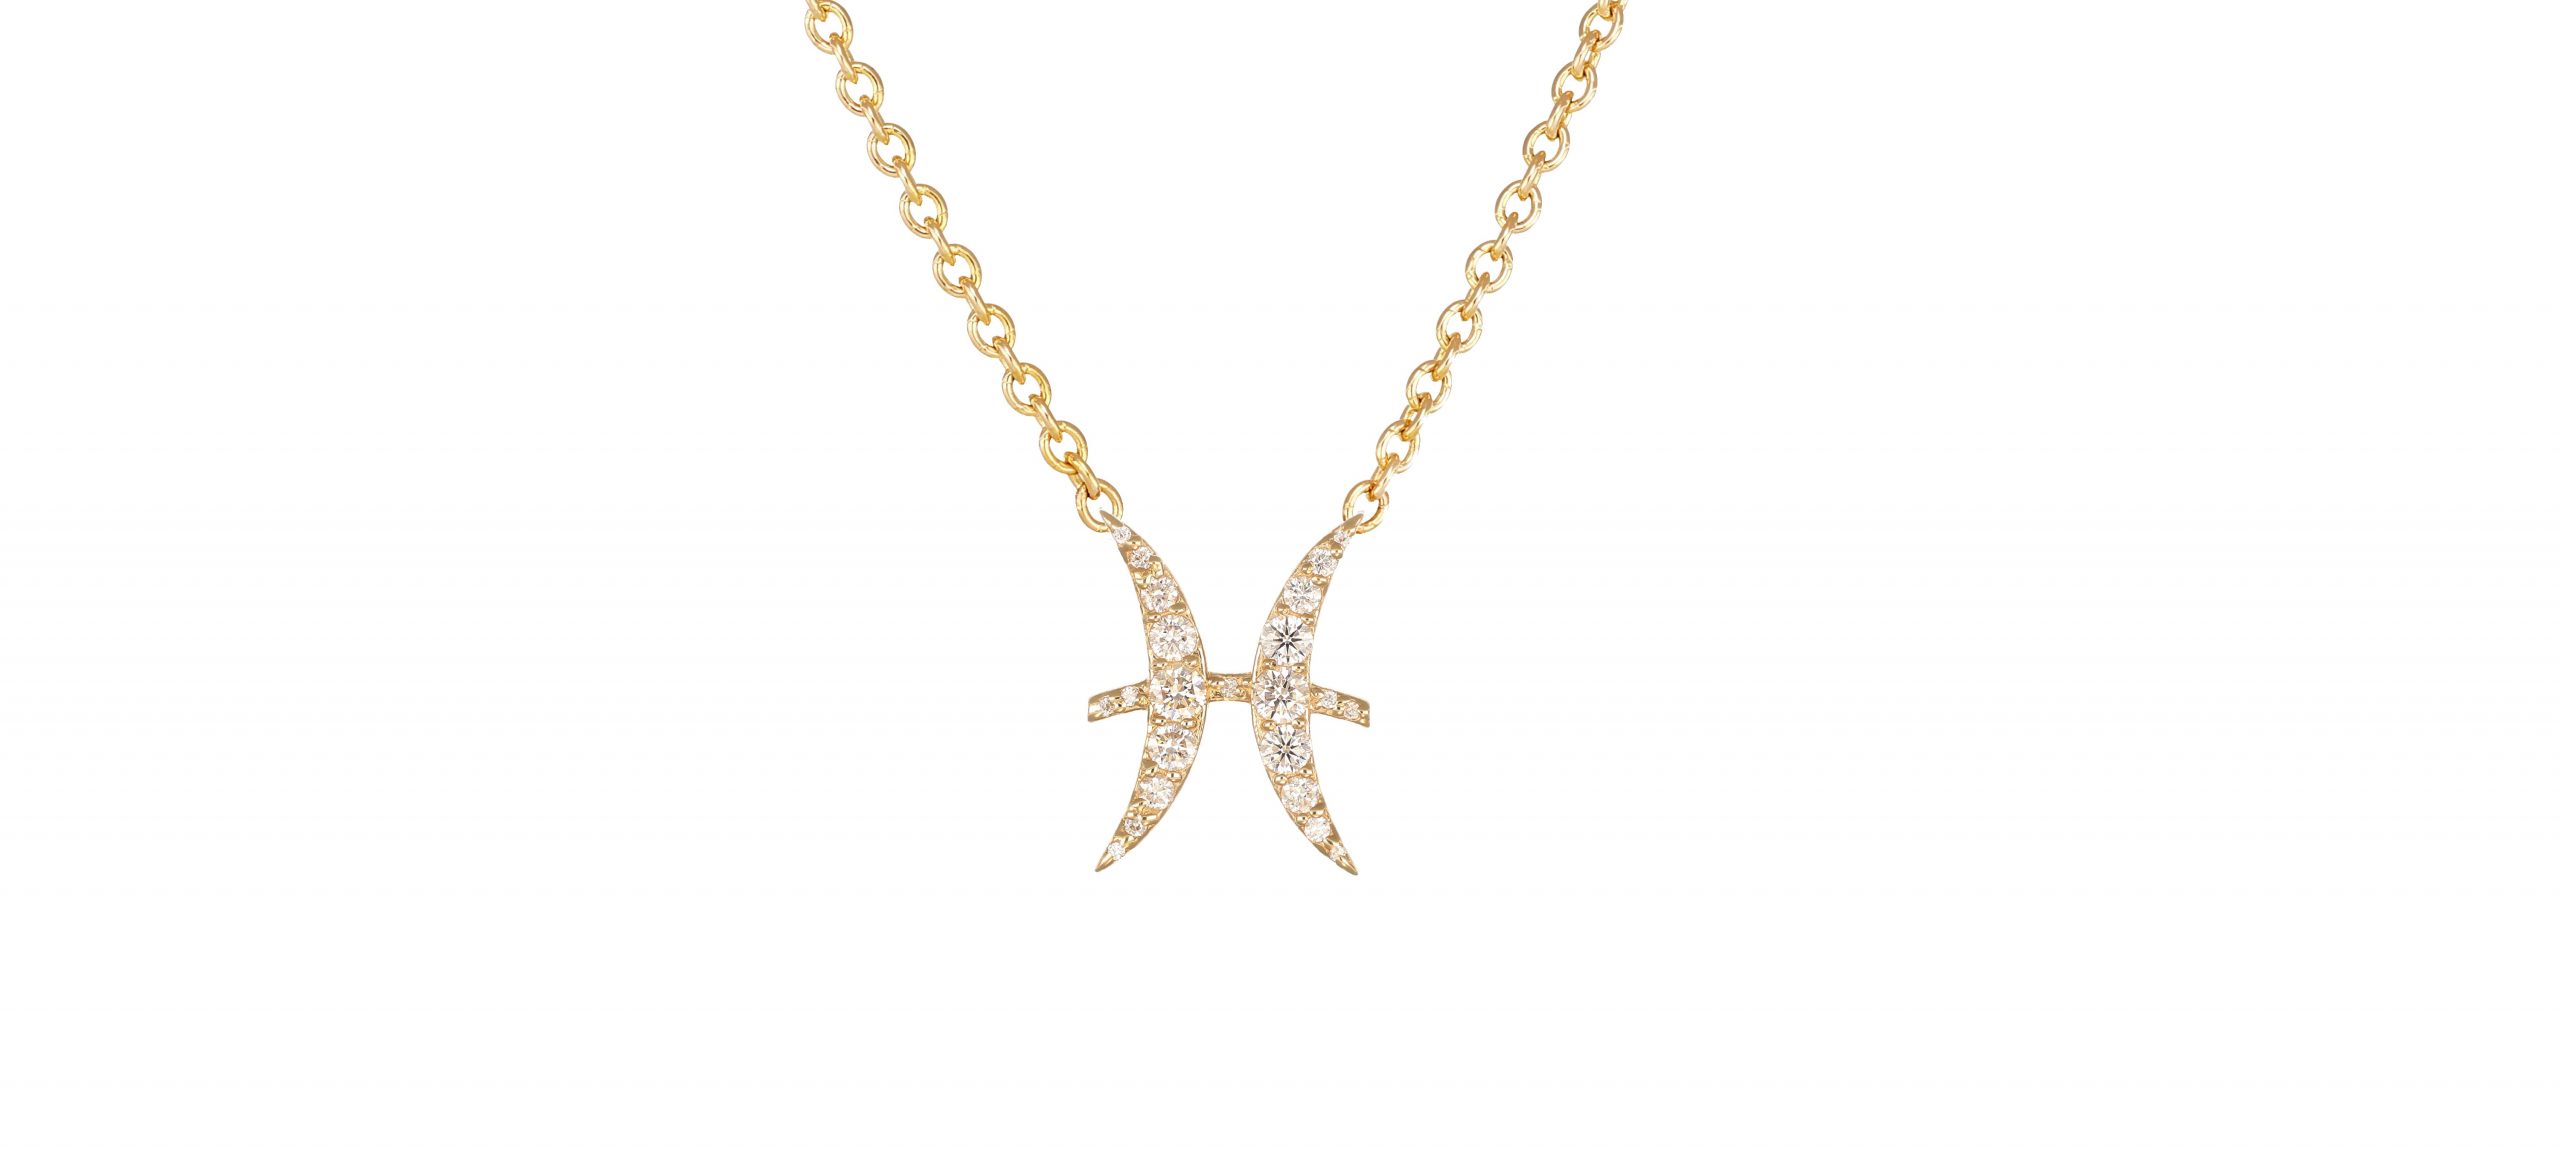 Pisces-Diamonds-Necklace-by-Starlust-Jewelry.-14K-Yellow-Gold